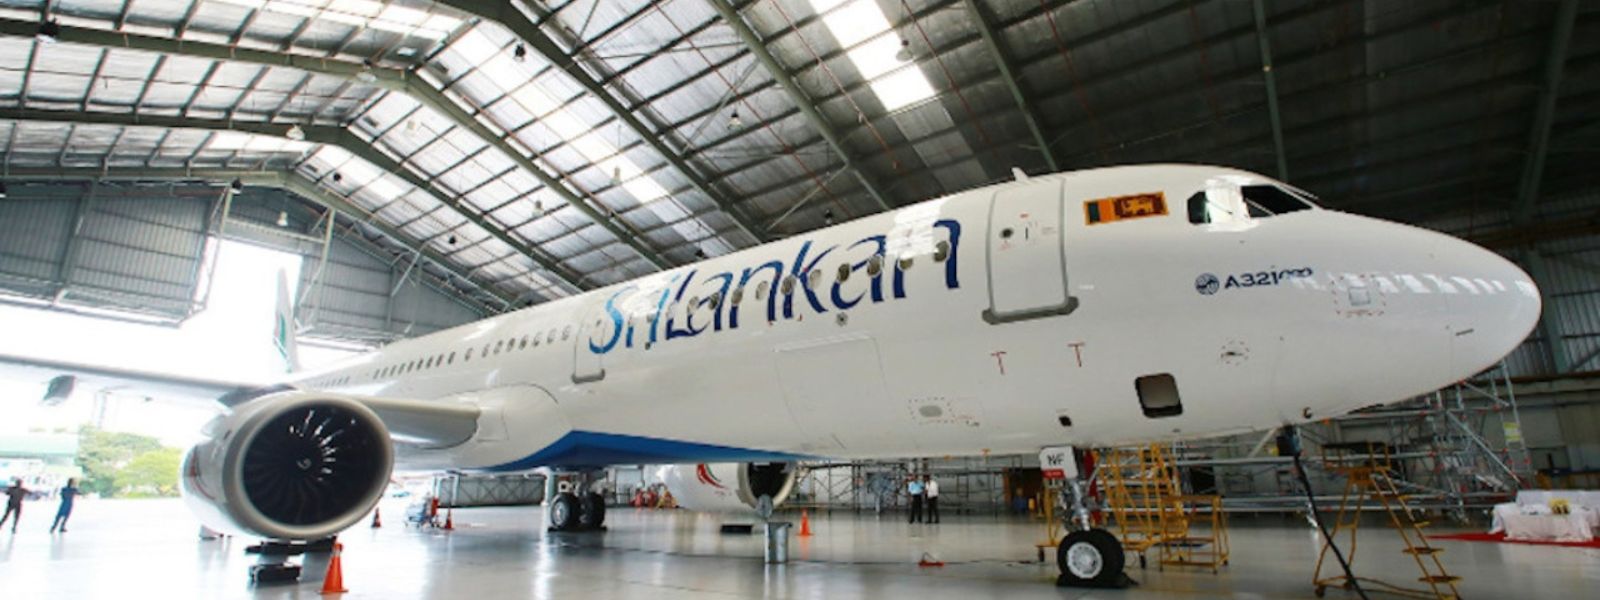 Sri Lanka to Absorb 50% of National Airline Debt